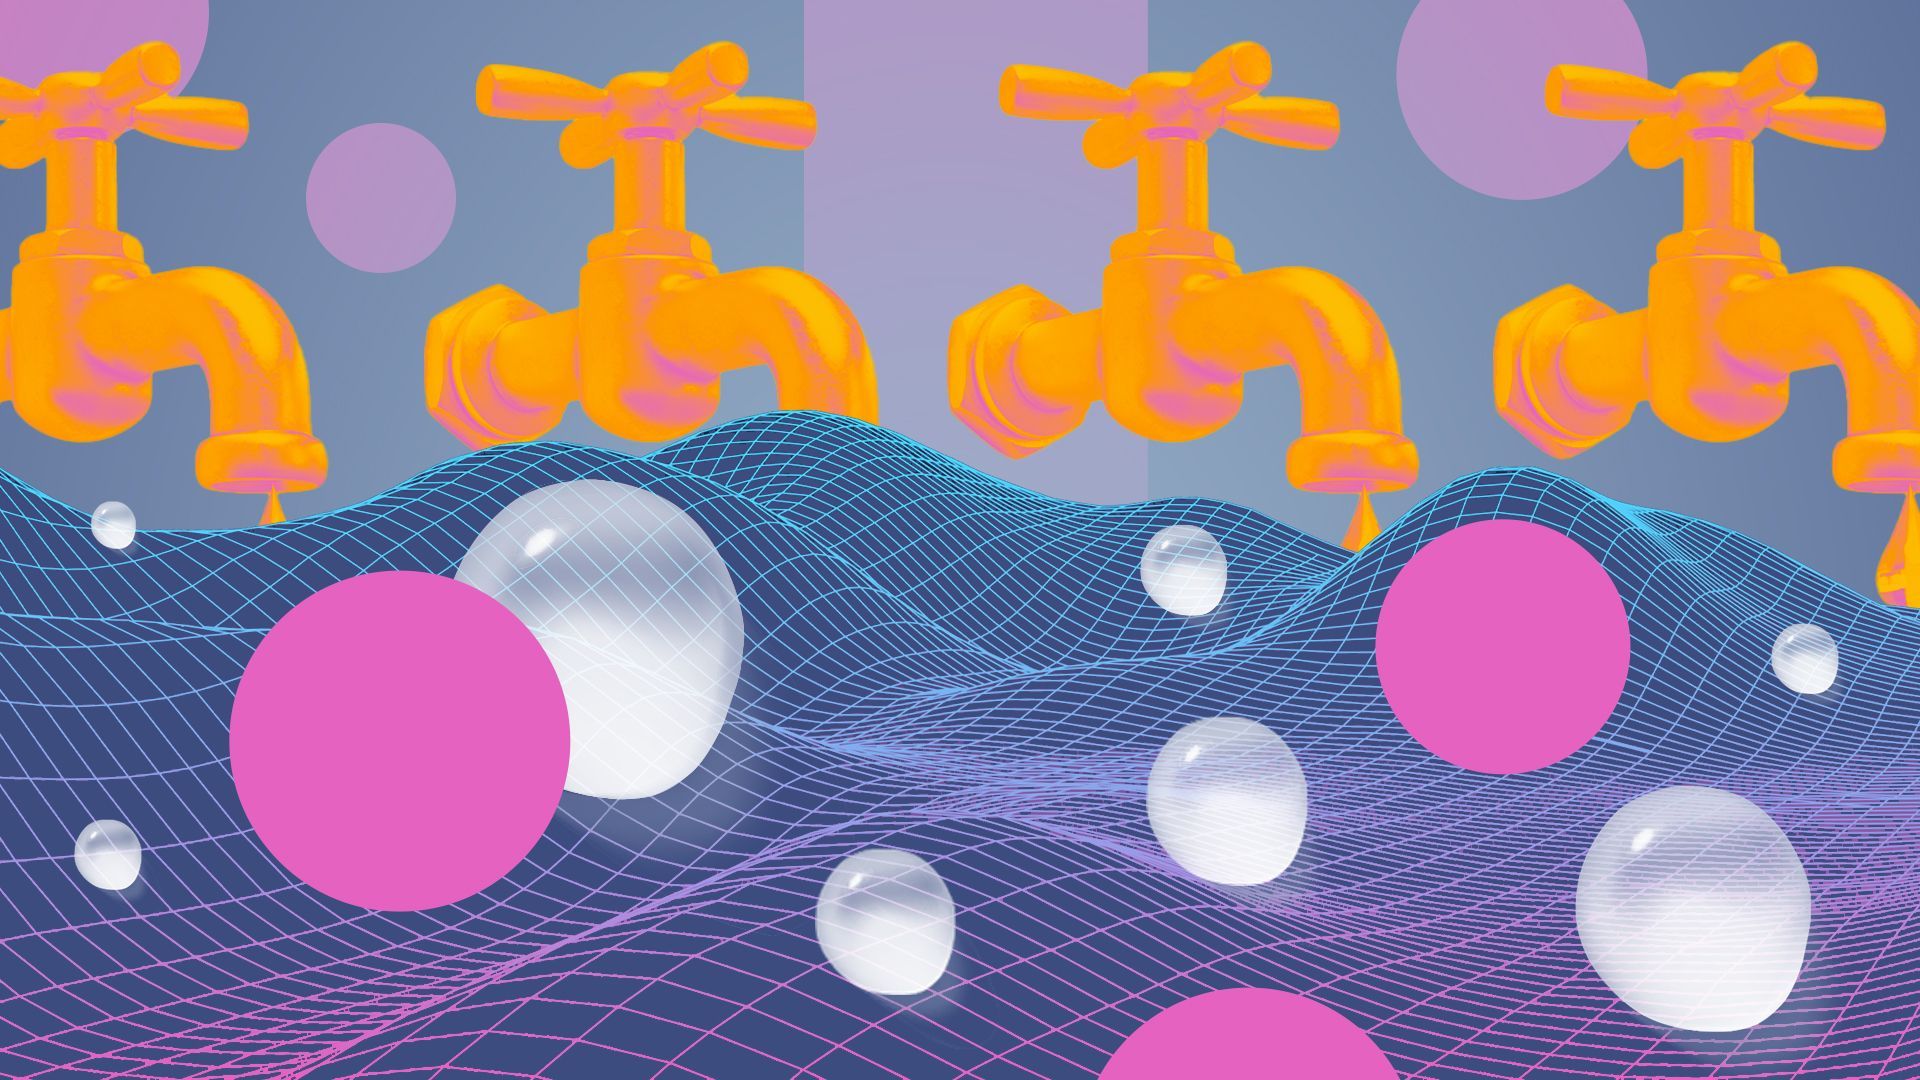 Illustration of a wireframe futuristic landscape with large water faucets in the distance surrounded by abstract circles and radical colors